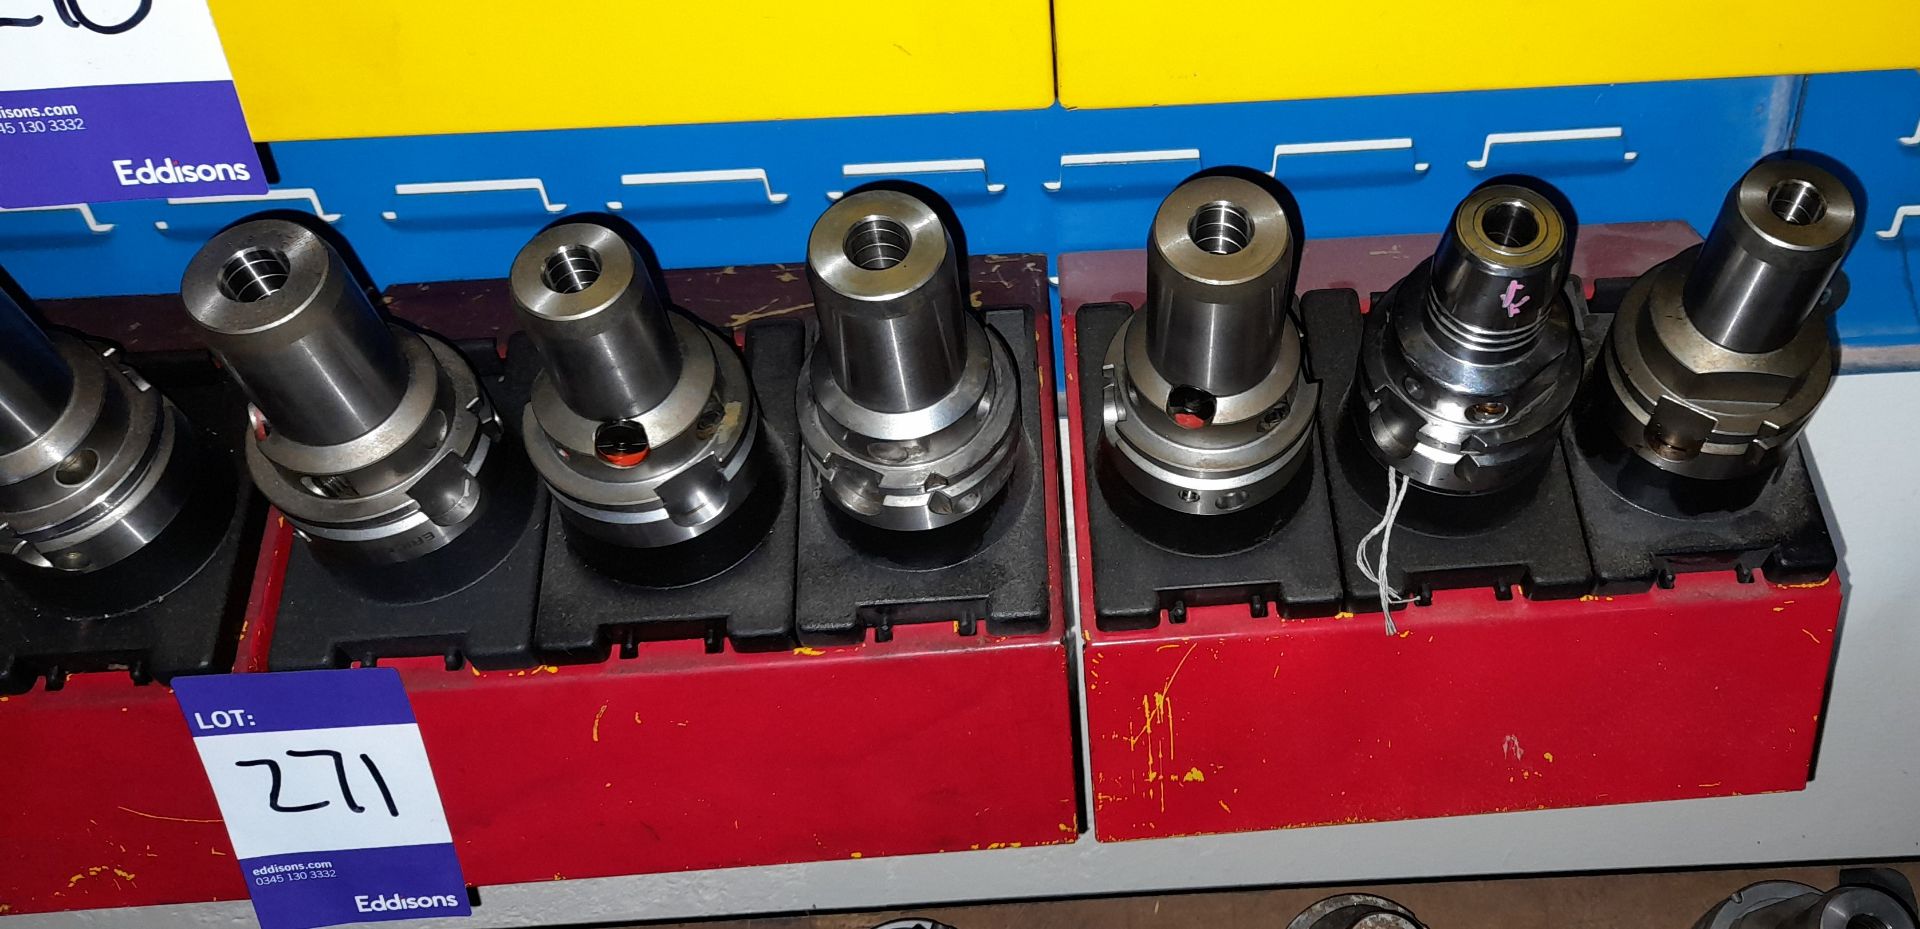 12 x Various HSK extension CNC tool holders, to yellow holder (rack not included) - Image 2 of 3